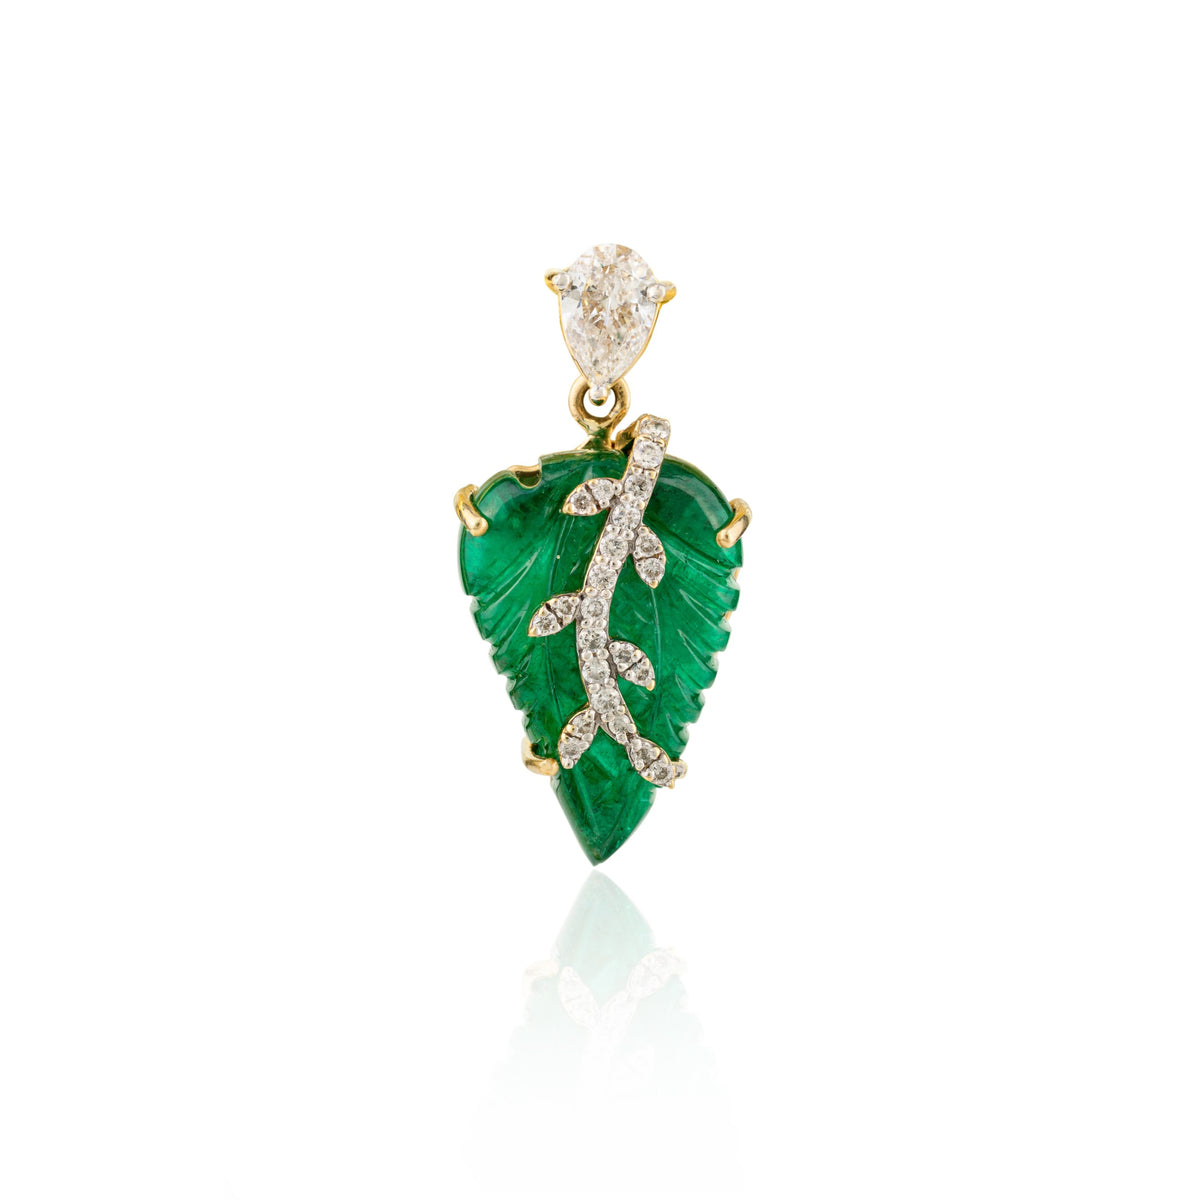 18K Solid Yellow Gold 9.99 Carat Carved Leaf Emerald Brooch Pendant